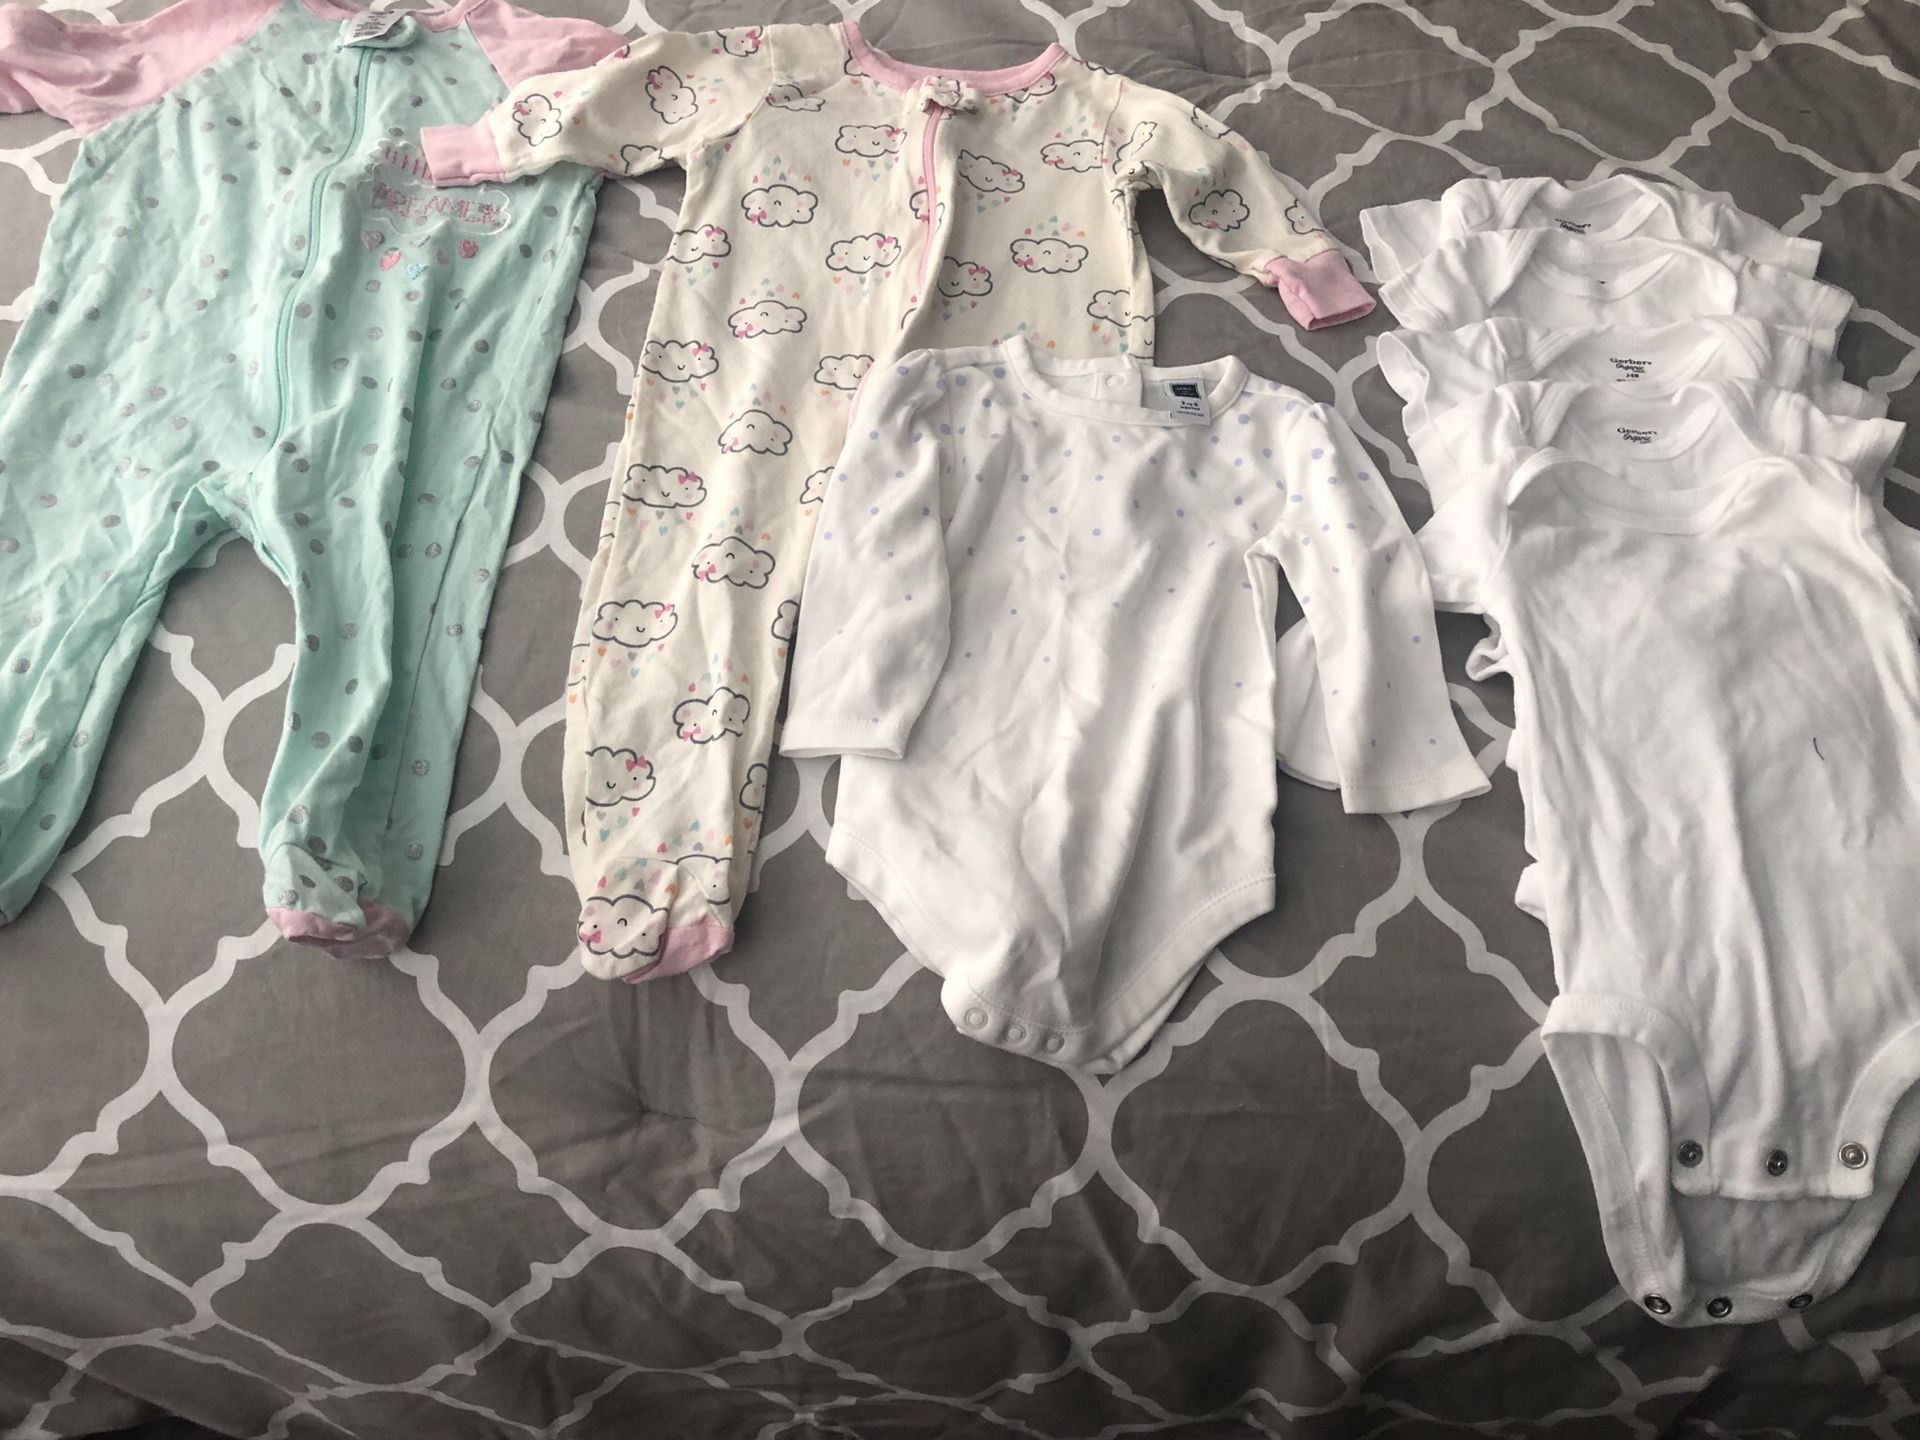 Brand new clothes for baby girl 3-6 months